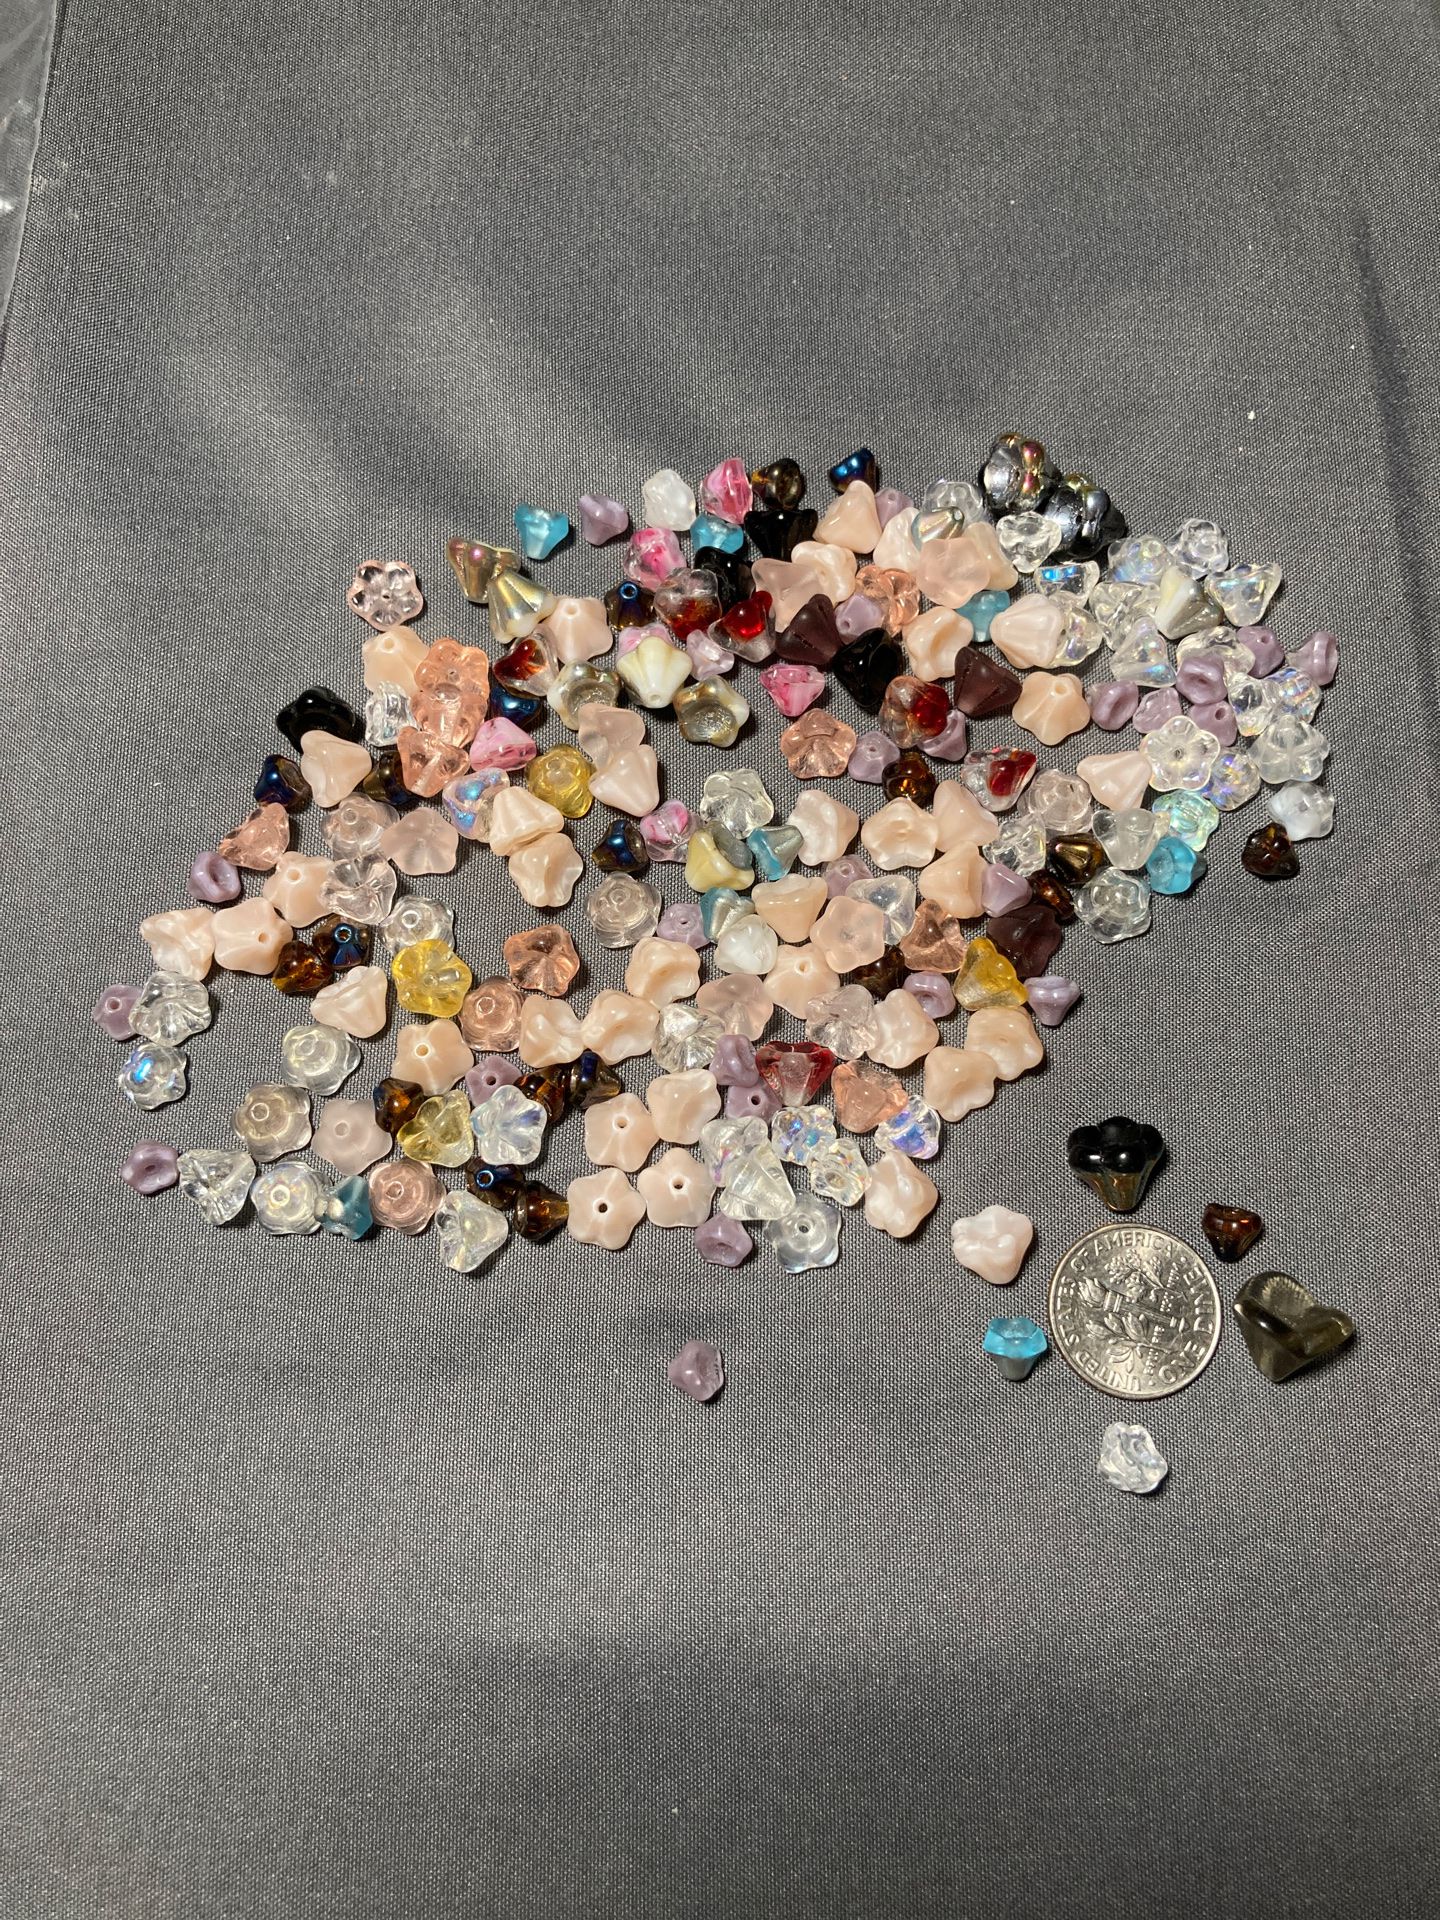 All beads are pending-Huge mixed lot of vintage Buttercup glass beads over 100 $4.00